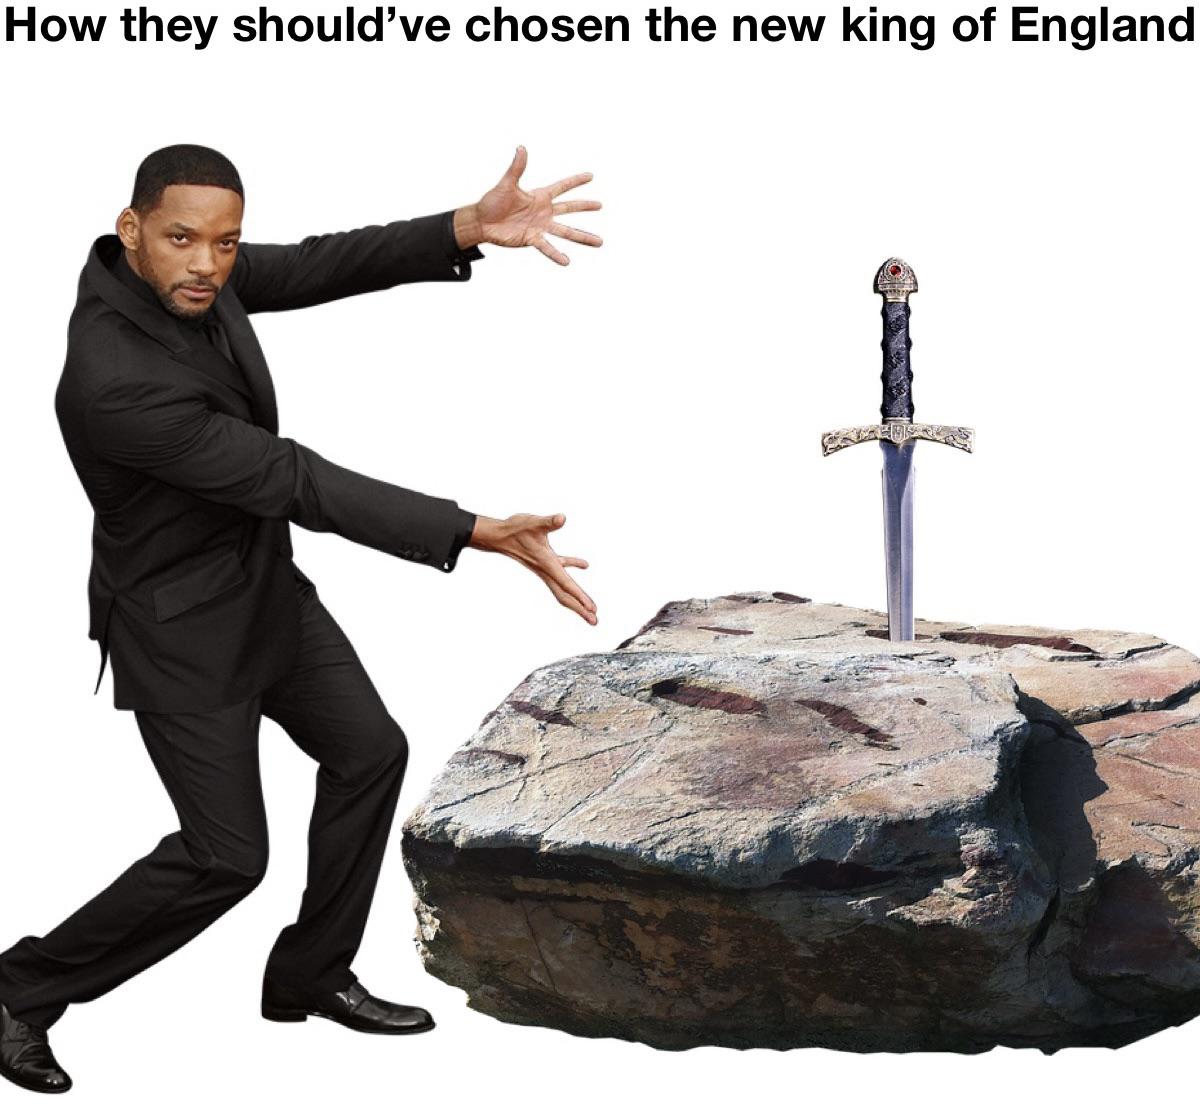 funny memes and pics - will smith showing off - How they should've chosen the new king of England